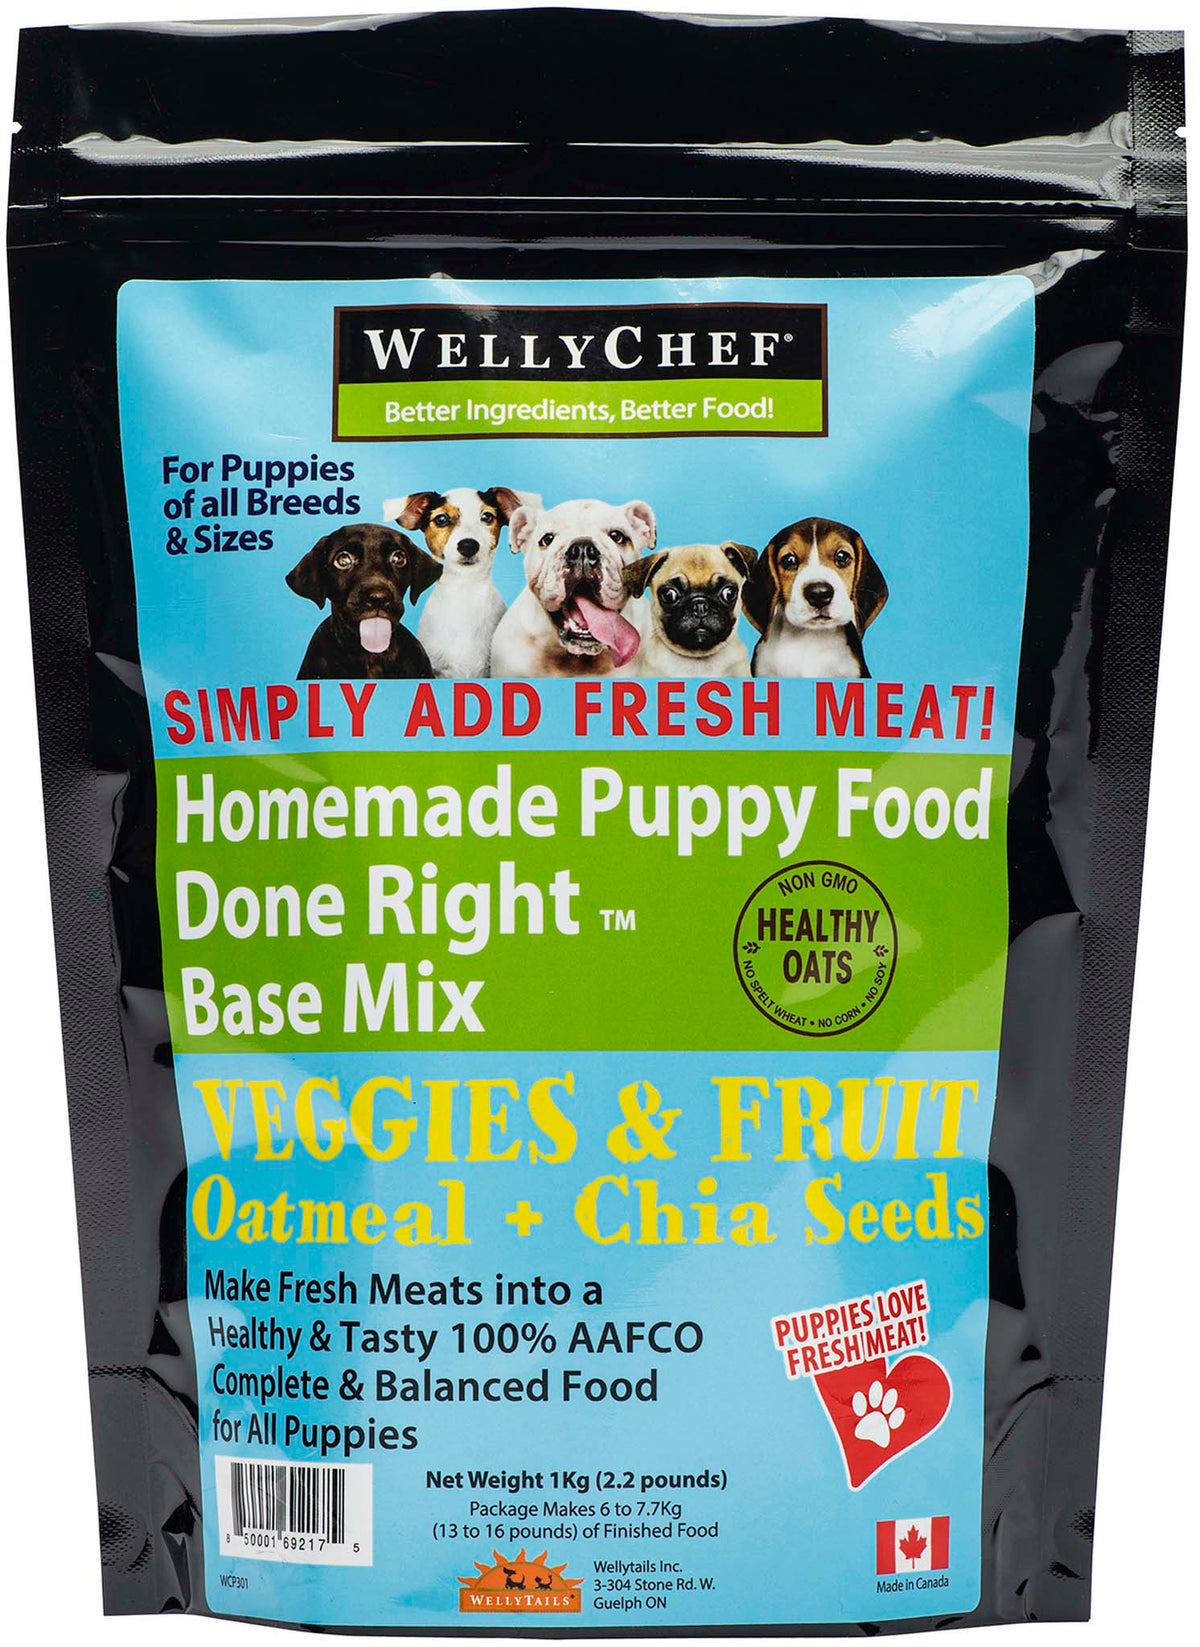 WellyChef  Homemade Puppy Food Done Right Base Mix - Just Add Fresh Meat